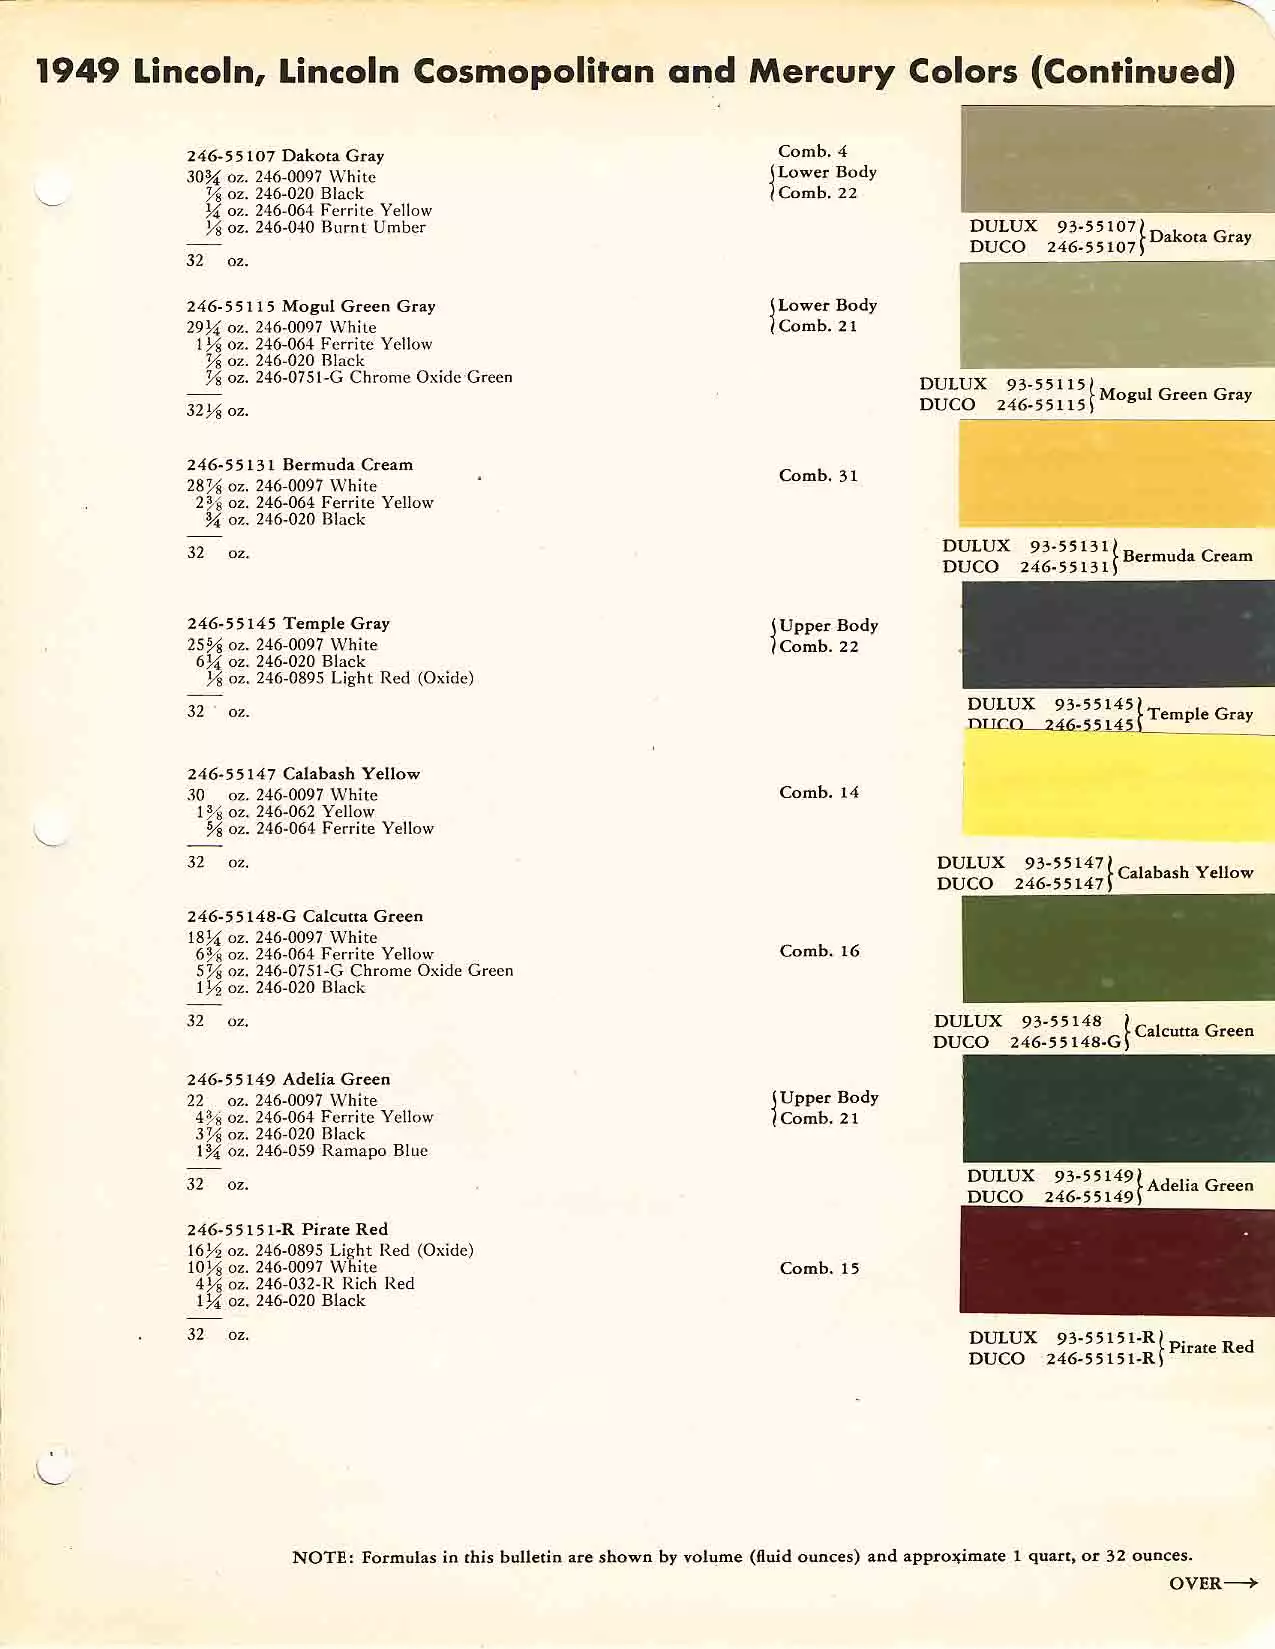 exterior colors, their codes, and example swatches used on lincoln & mercury vehicles in 1949